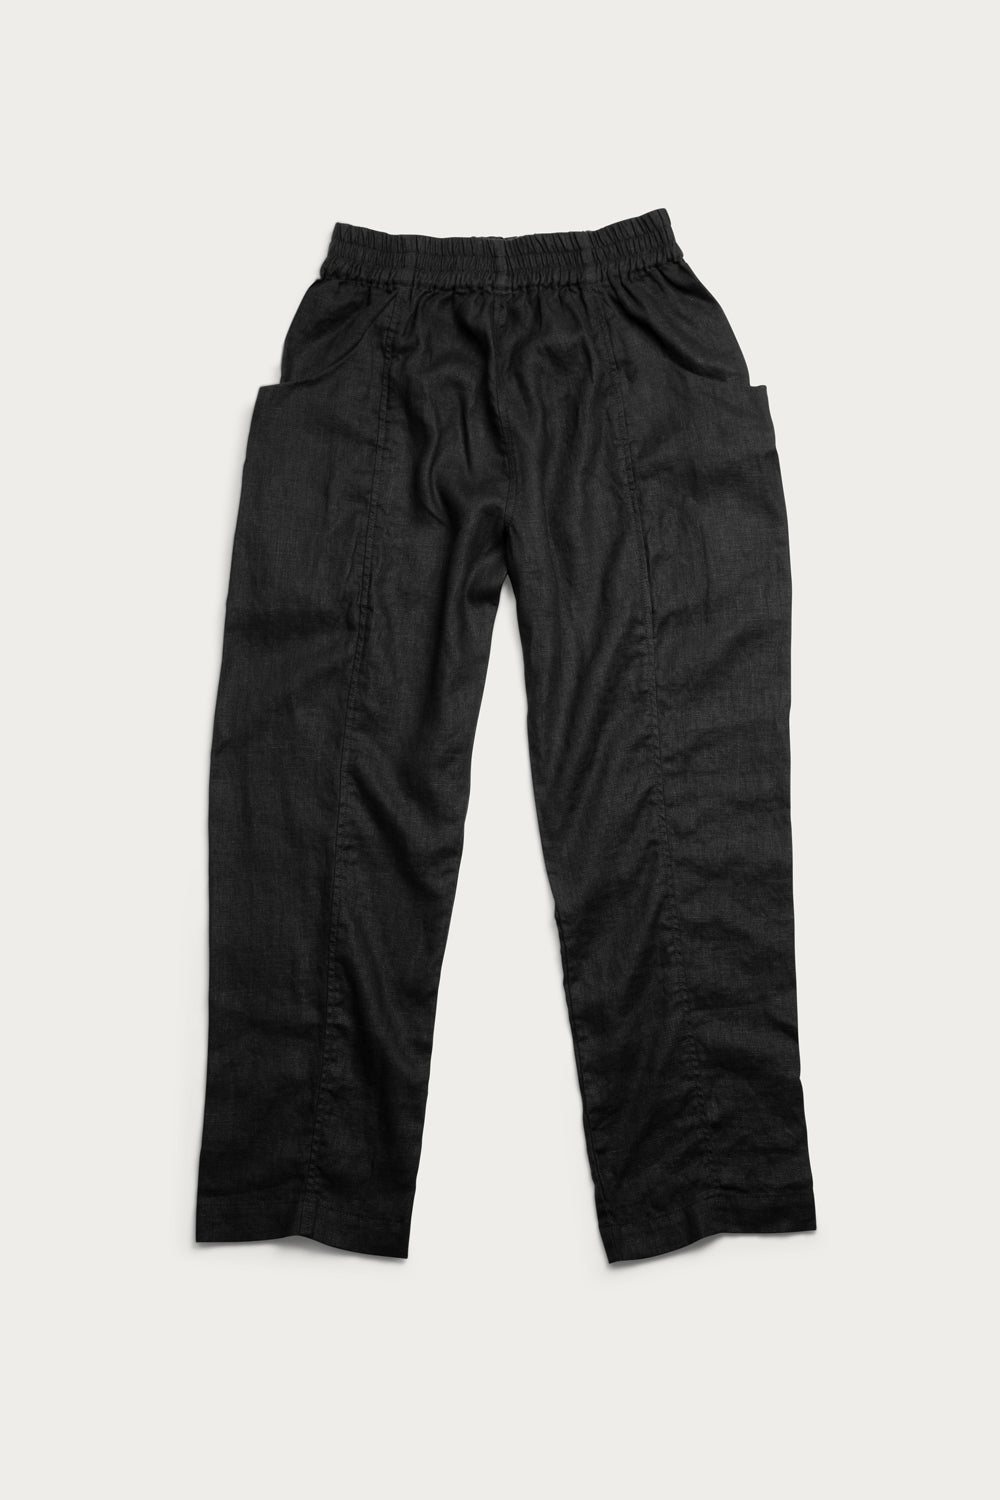 Clyde Work Pant in Midweight Linen Black#color_black